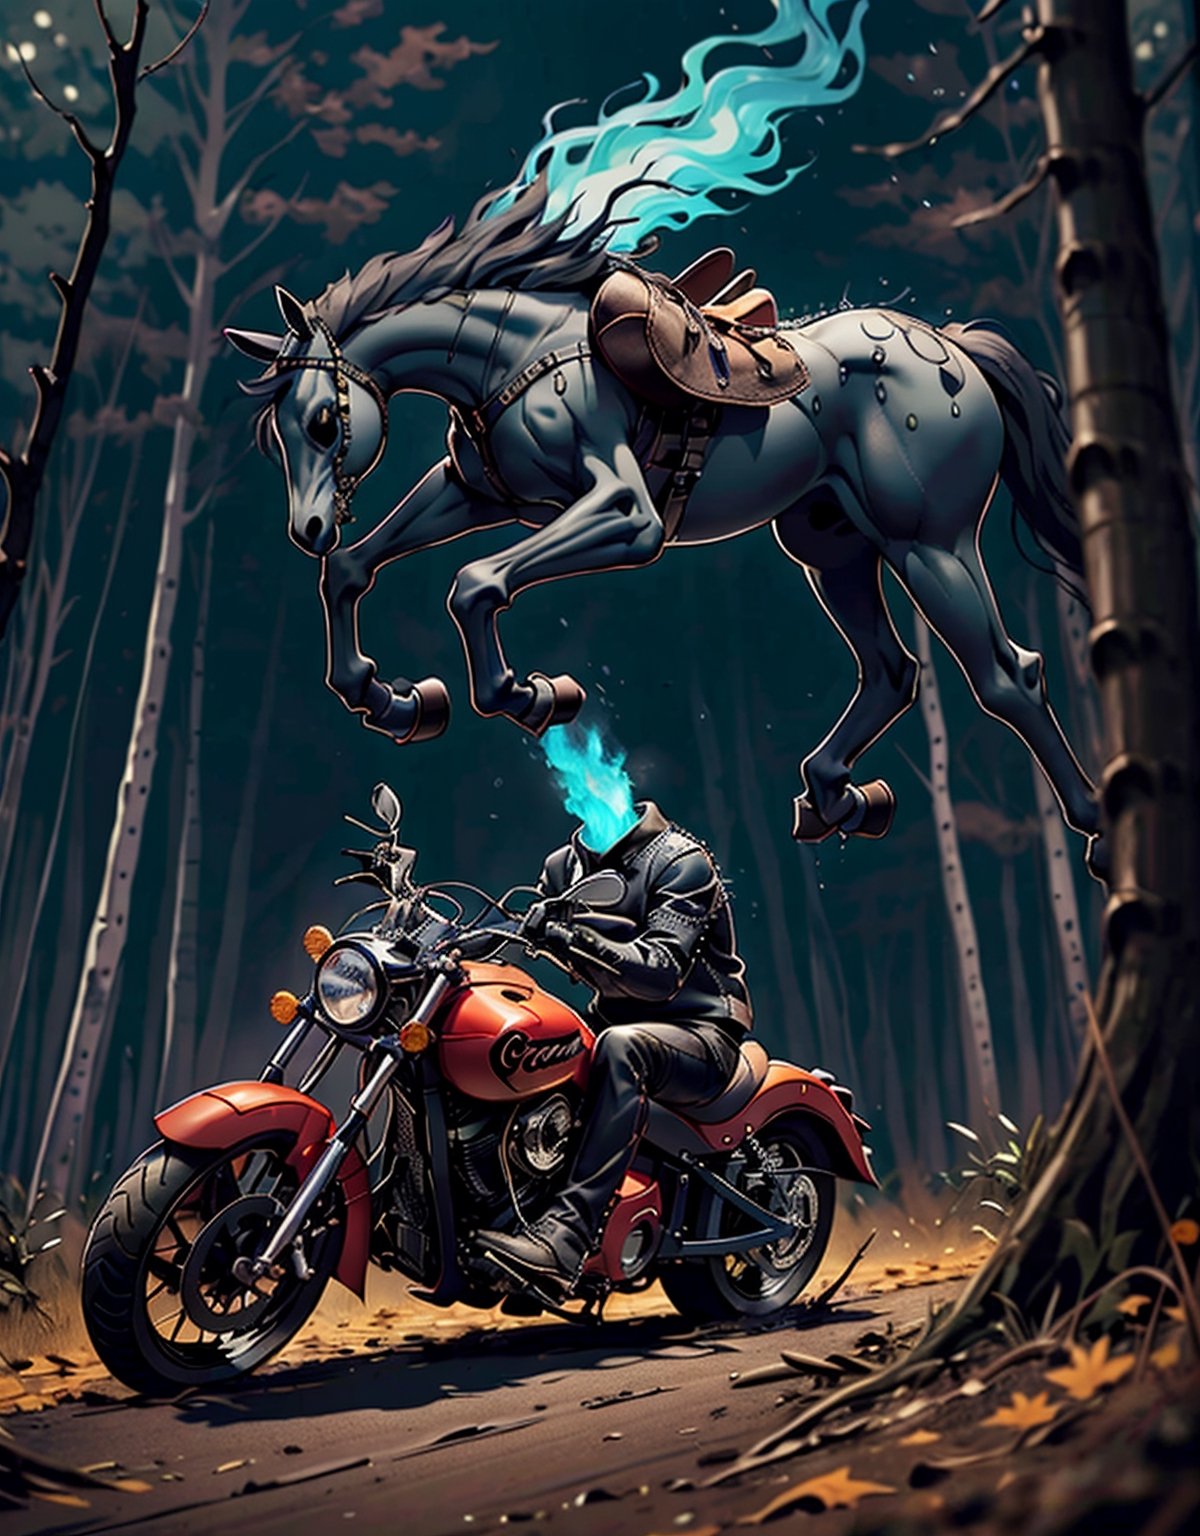 (((a headless undead human)))((he wears a black studded leather jacket, boots with spurs)),((( He is driving a black Indian motorcycle))) the scene is a wooded highway at night.(((ghost horse running alongside motorcycle))),human on fire.Drippy, burnt marshmallow asthetic, twisty trees, autumn colors, green fog,More Detail,human on fire,DisembodiedHead